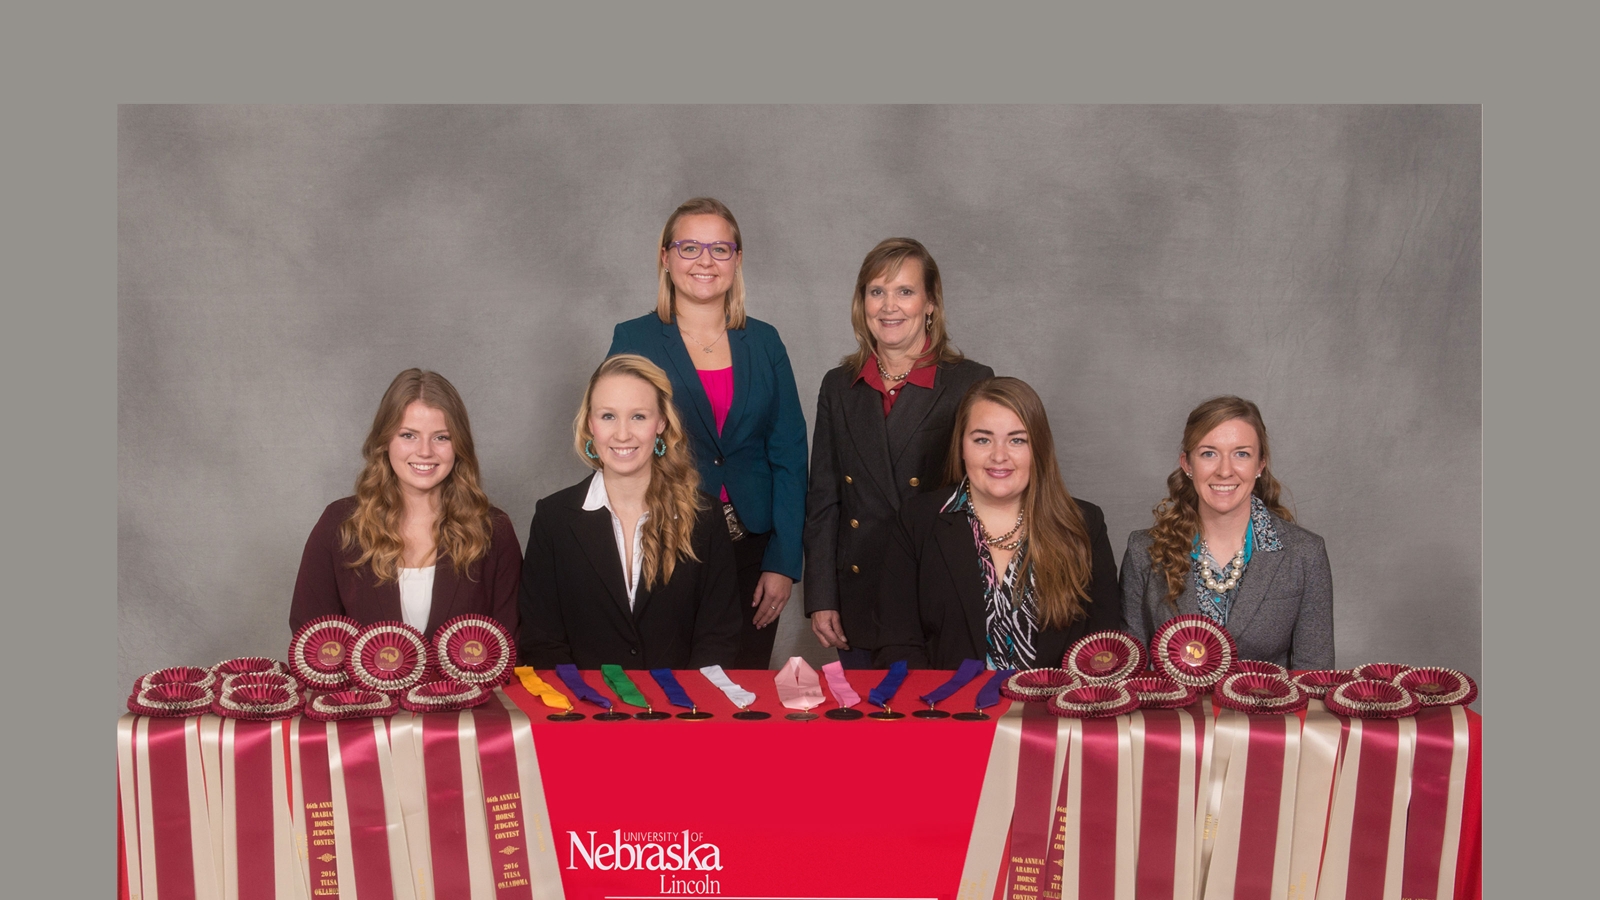 2016 group horse judging team picture